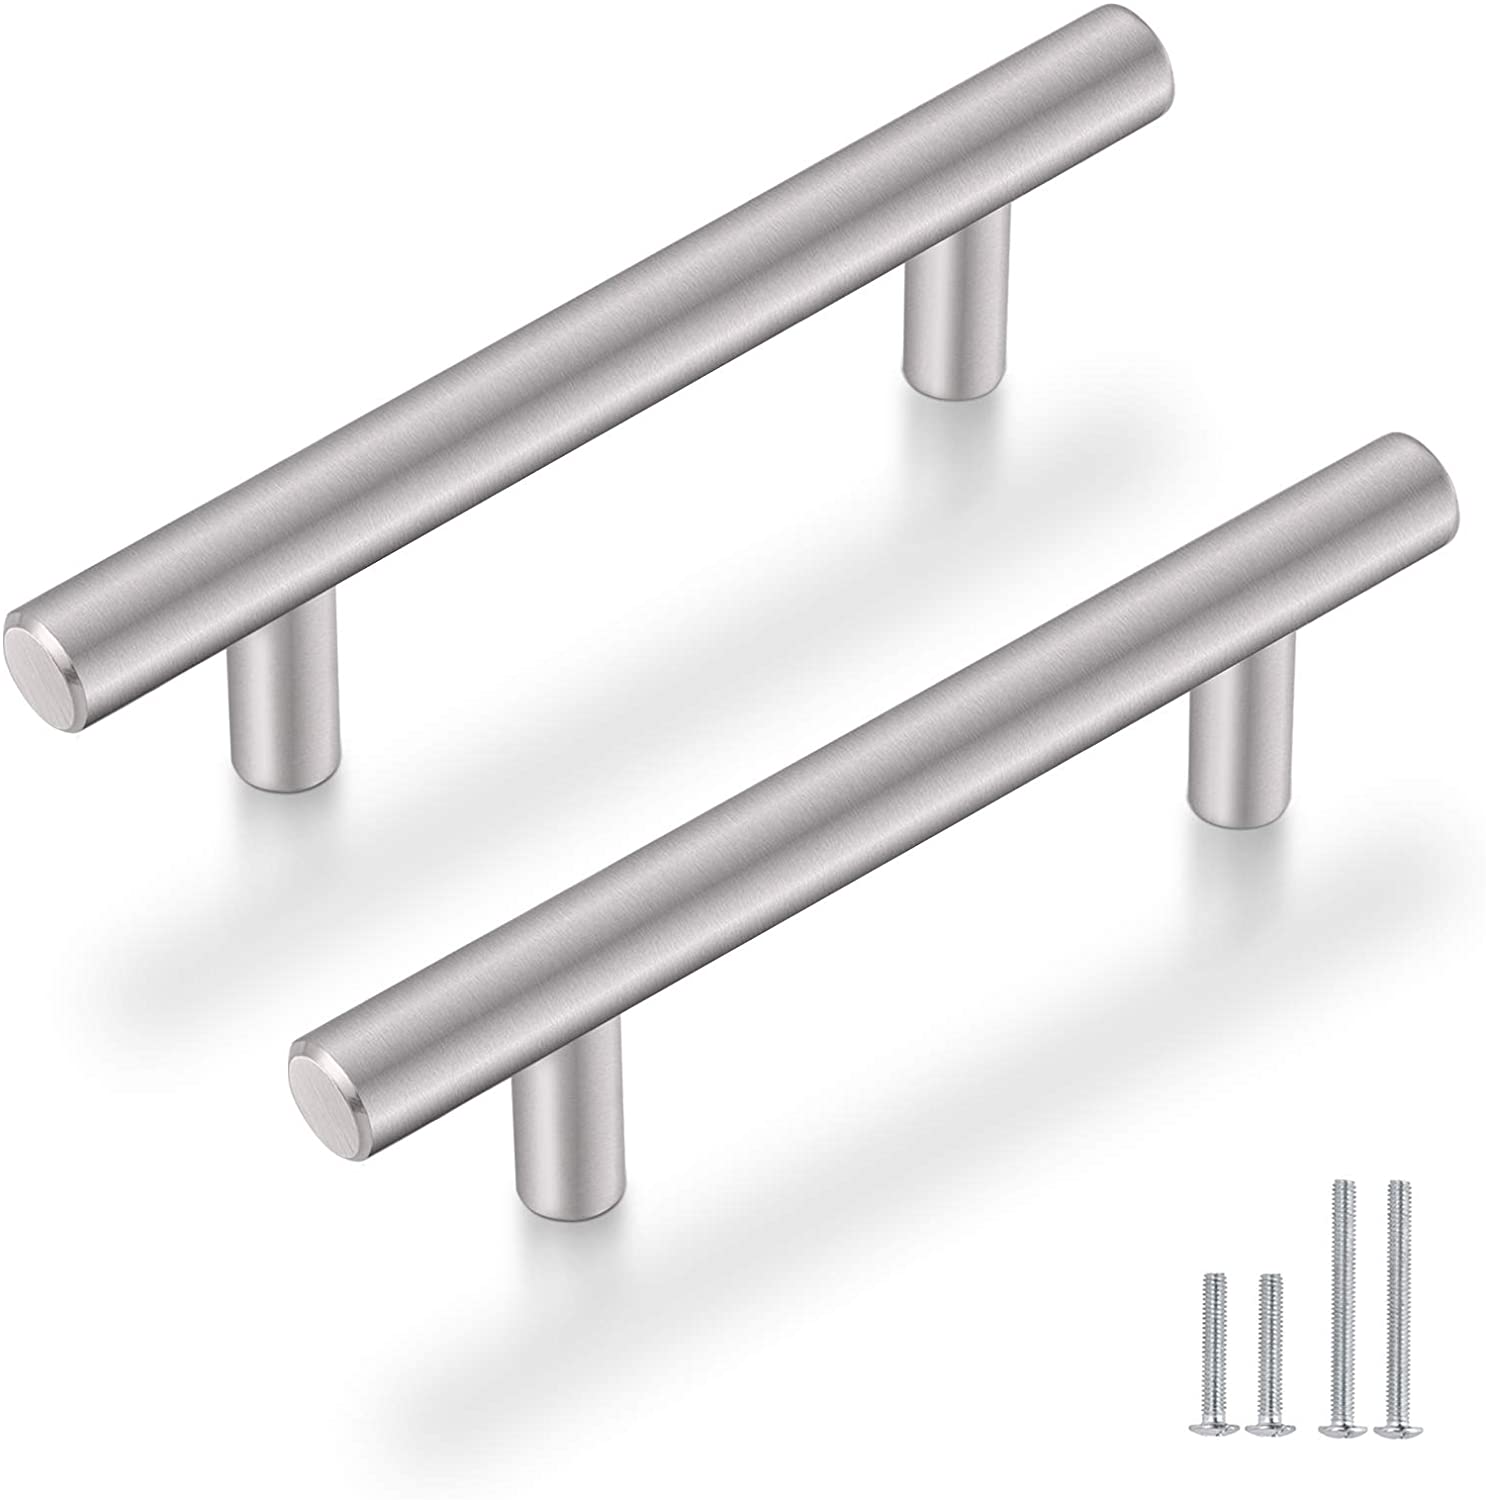 (10 Pack) Probrico Solid Stainless Steel Modern Euro Style Cabinet Pulls Dresser Drawer Handles Satin Nickel 3-3/4" Hole Center T Bar Kitchen Cupboard Handles 6" Overall Length Furniture Hardware - image 1 of 7